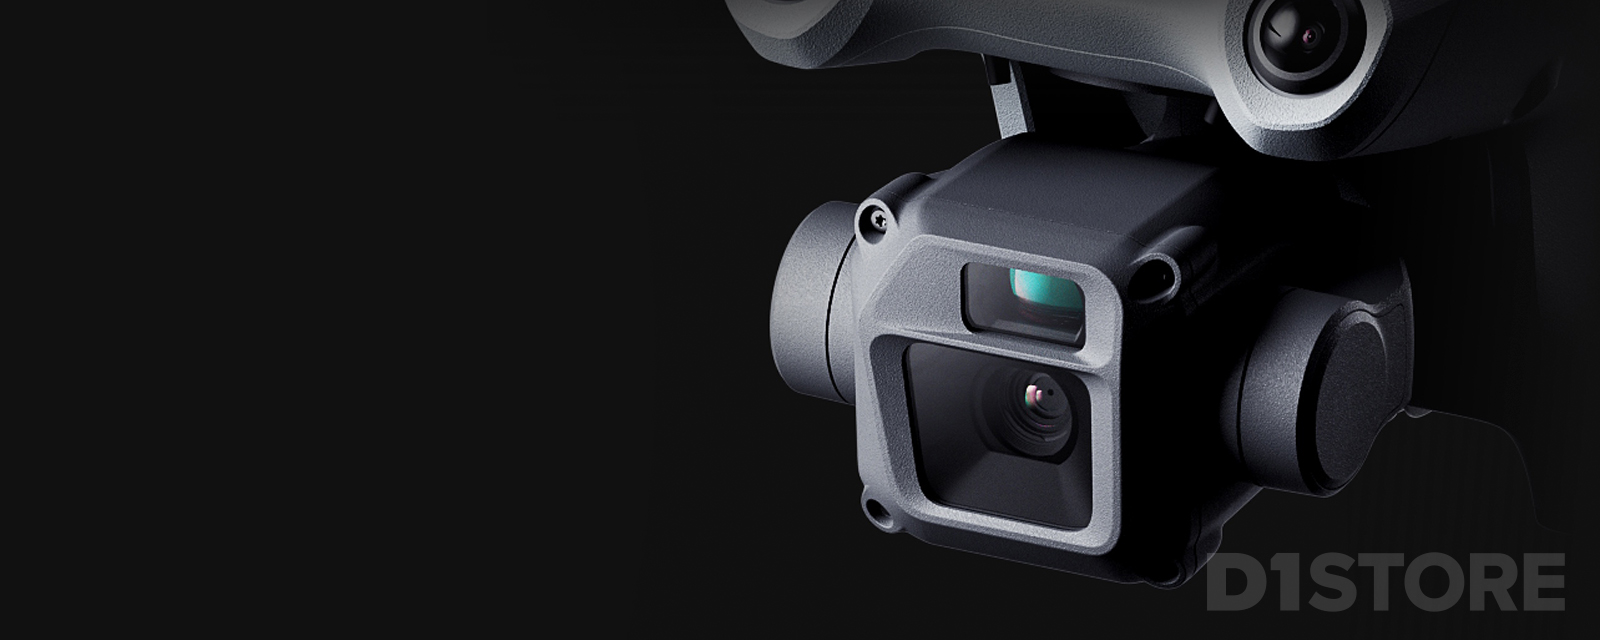 Close up image of the Matrice 3D drone camera